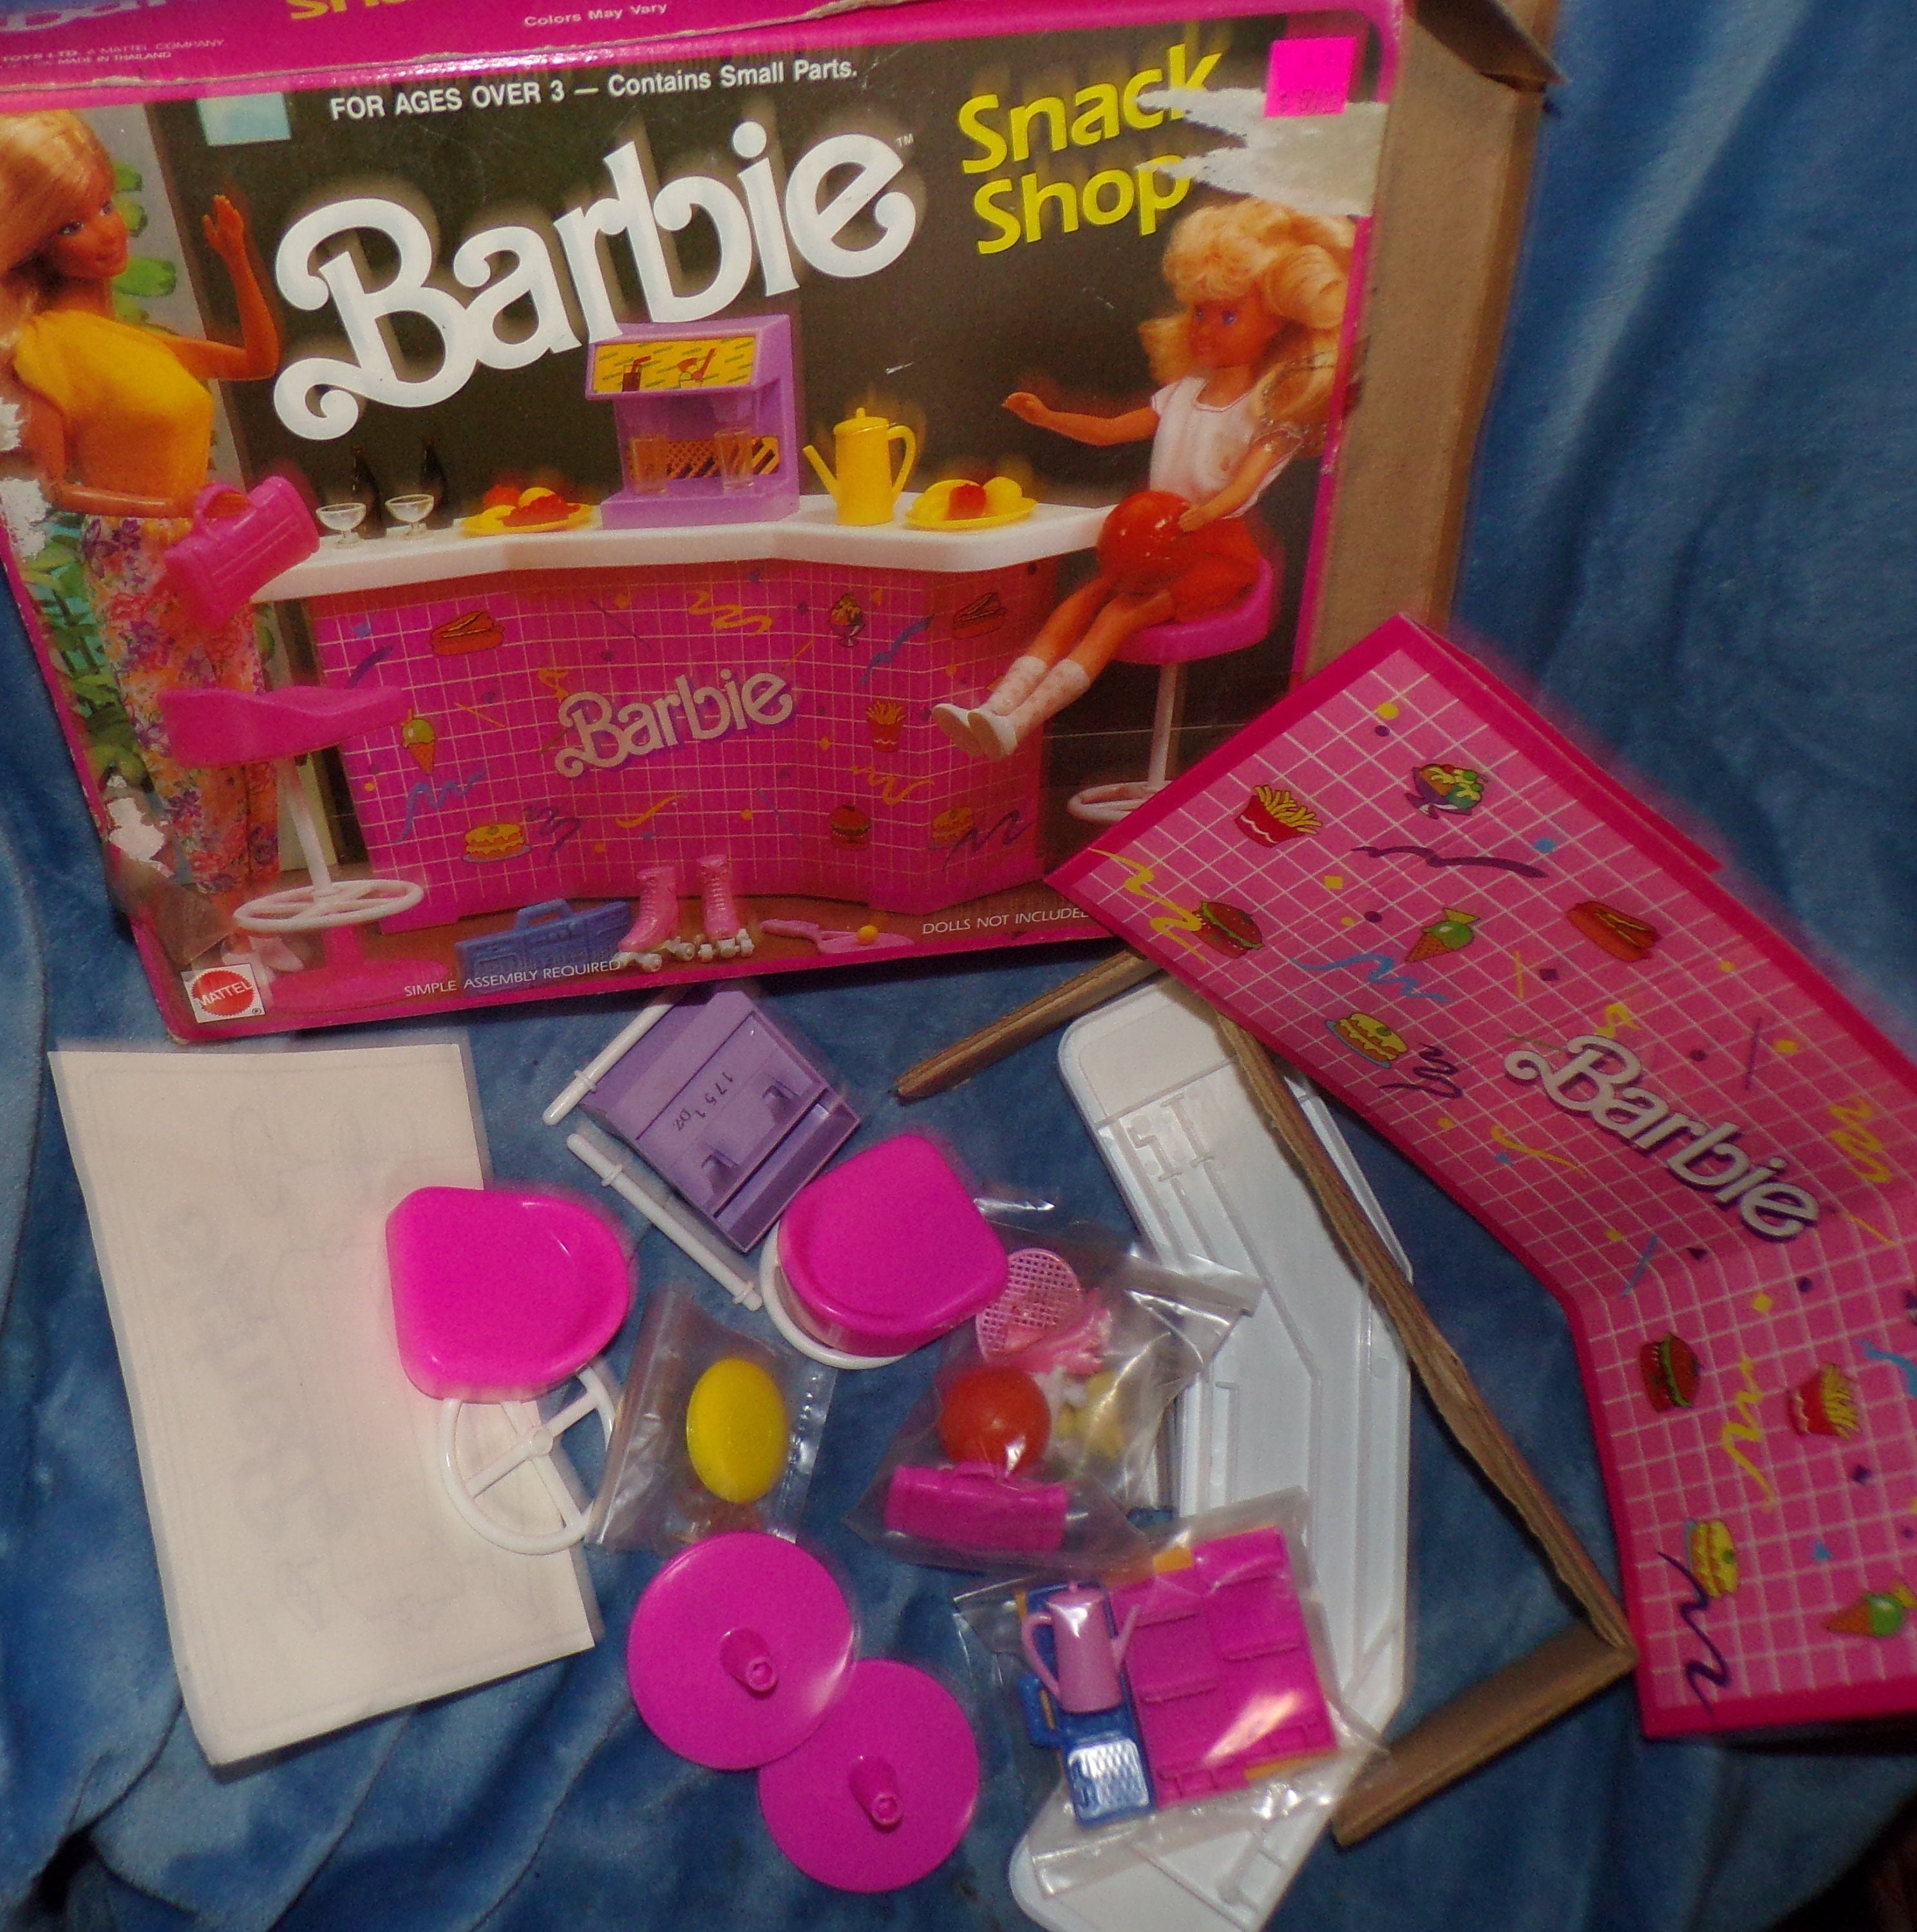 Vintage Barbie Food 80s 90s Retro Doll Size Accessories Cute Collectible 